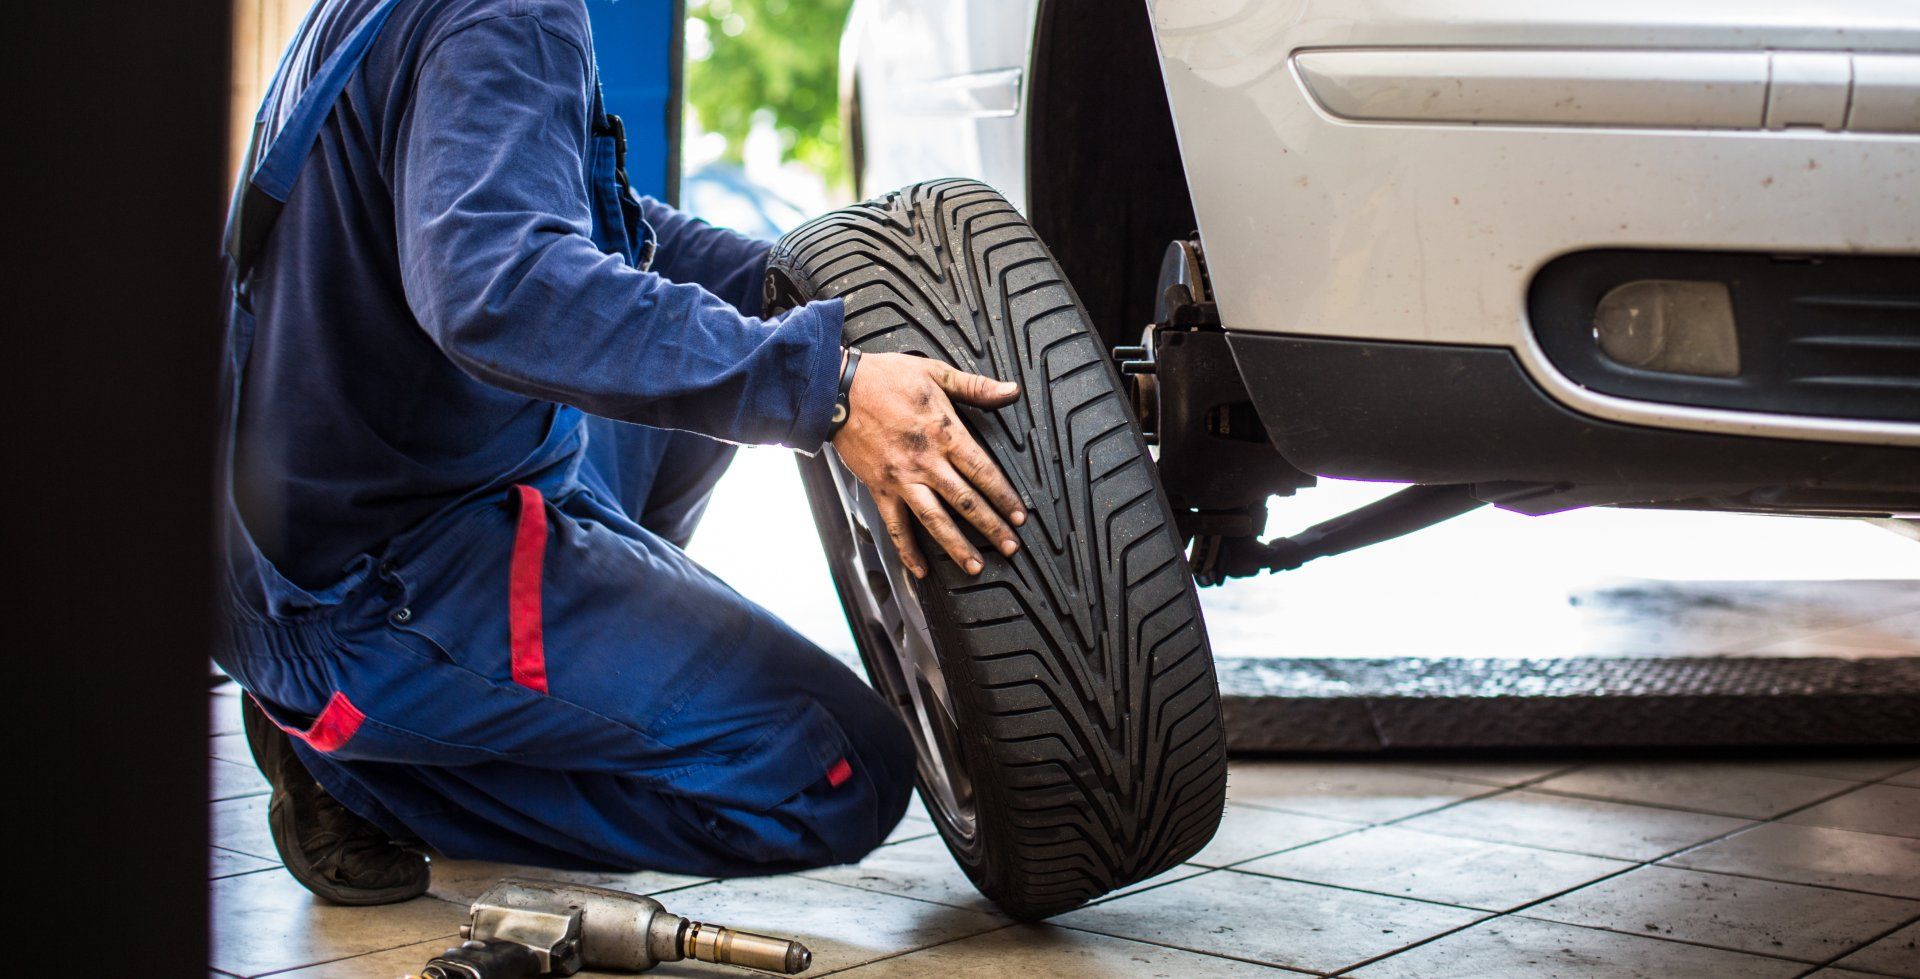 Mechanic Checking Car's Brake — Automotive Repair in Townsville